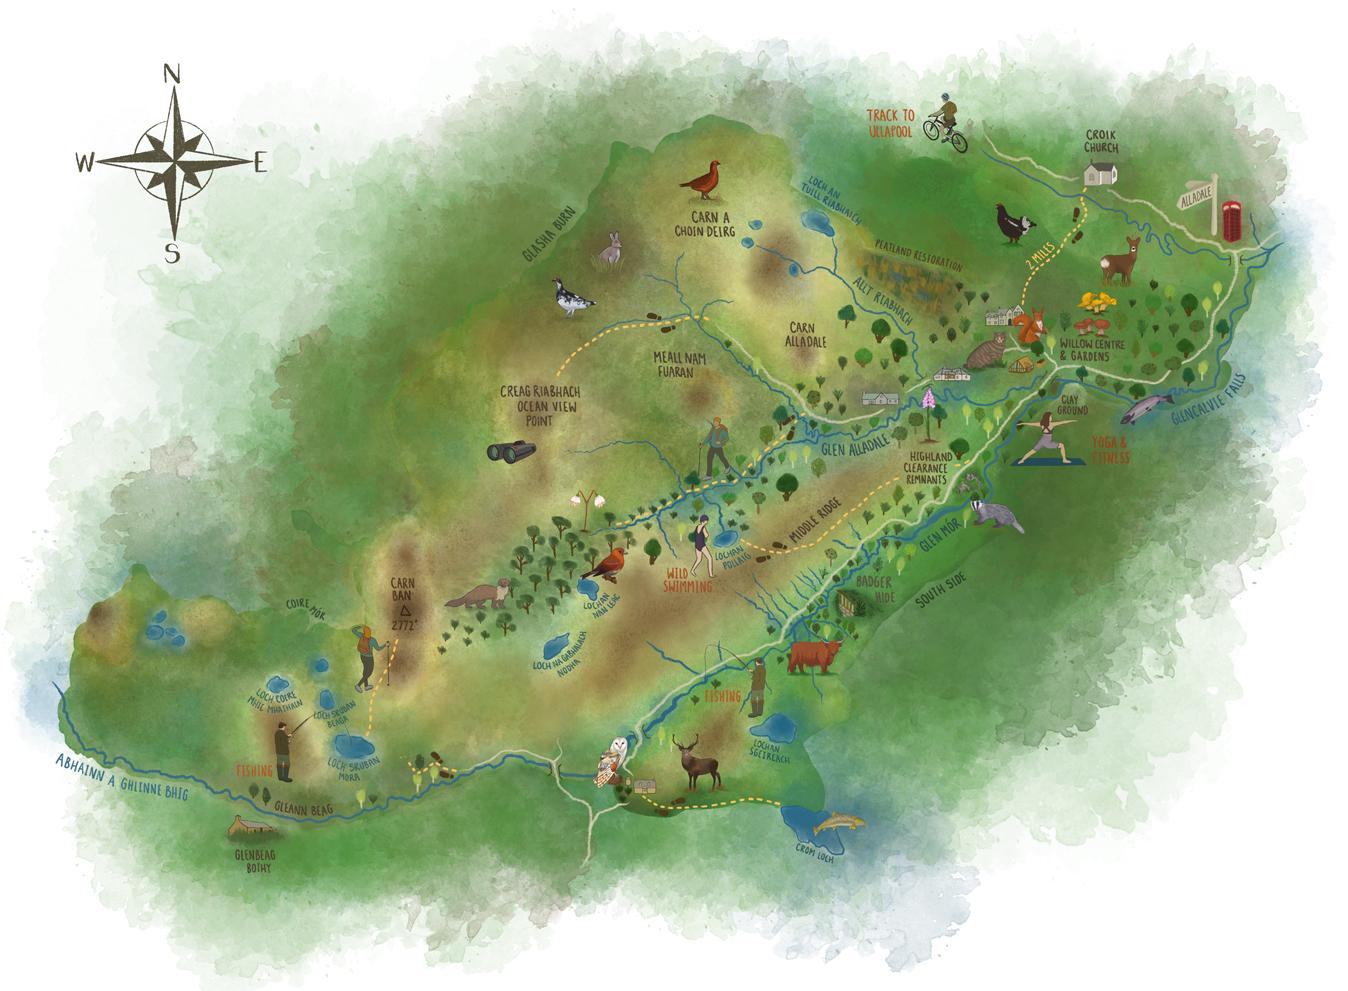 Illustrated map of the reserve, revealing all the species, shrubs and activities you can expect to find.